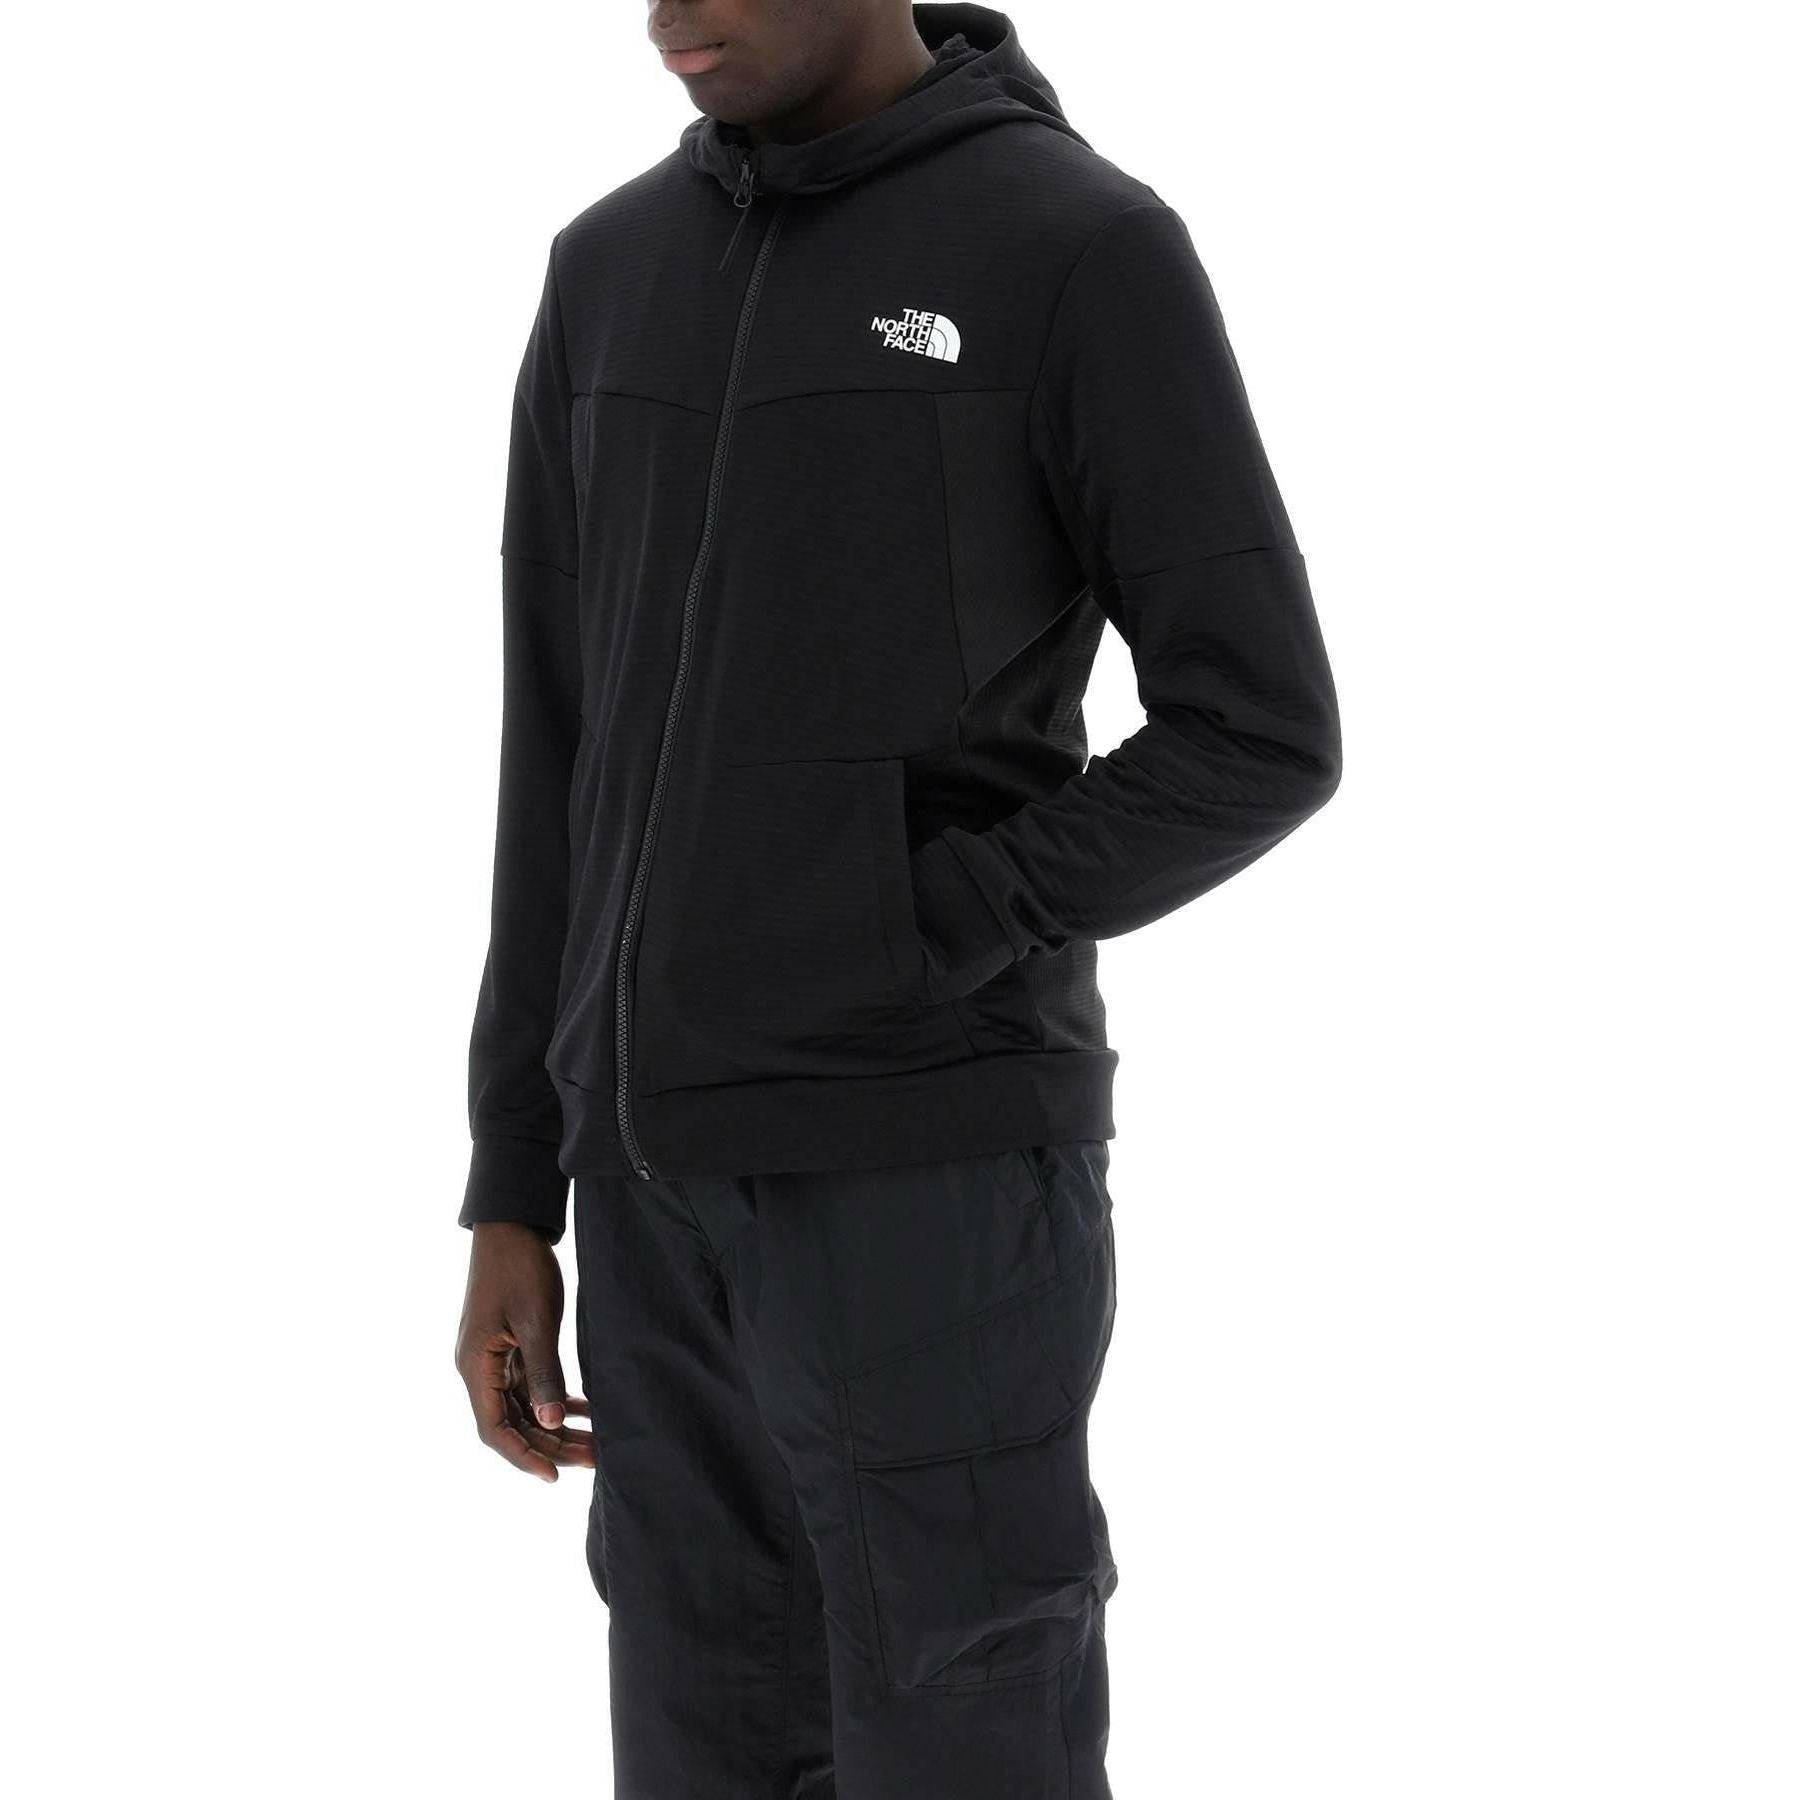 Black Logo Embroidered Zip-Up Hoodie THE NORTH FACE JOHN JULIA.